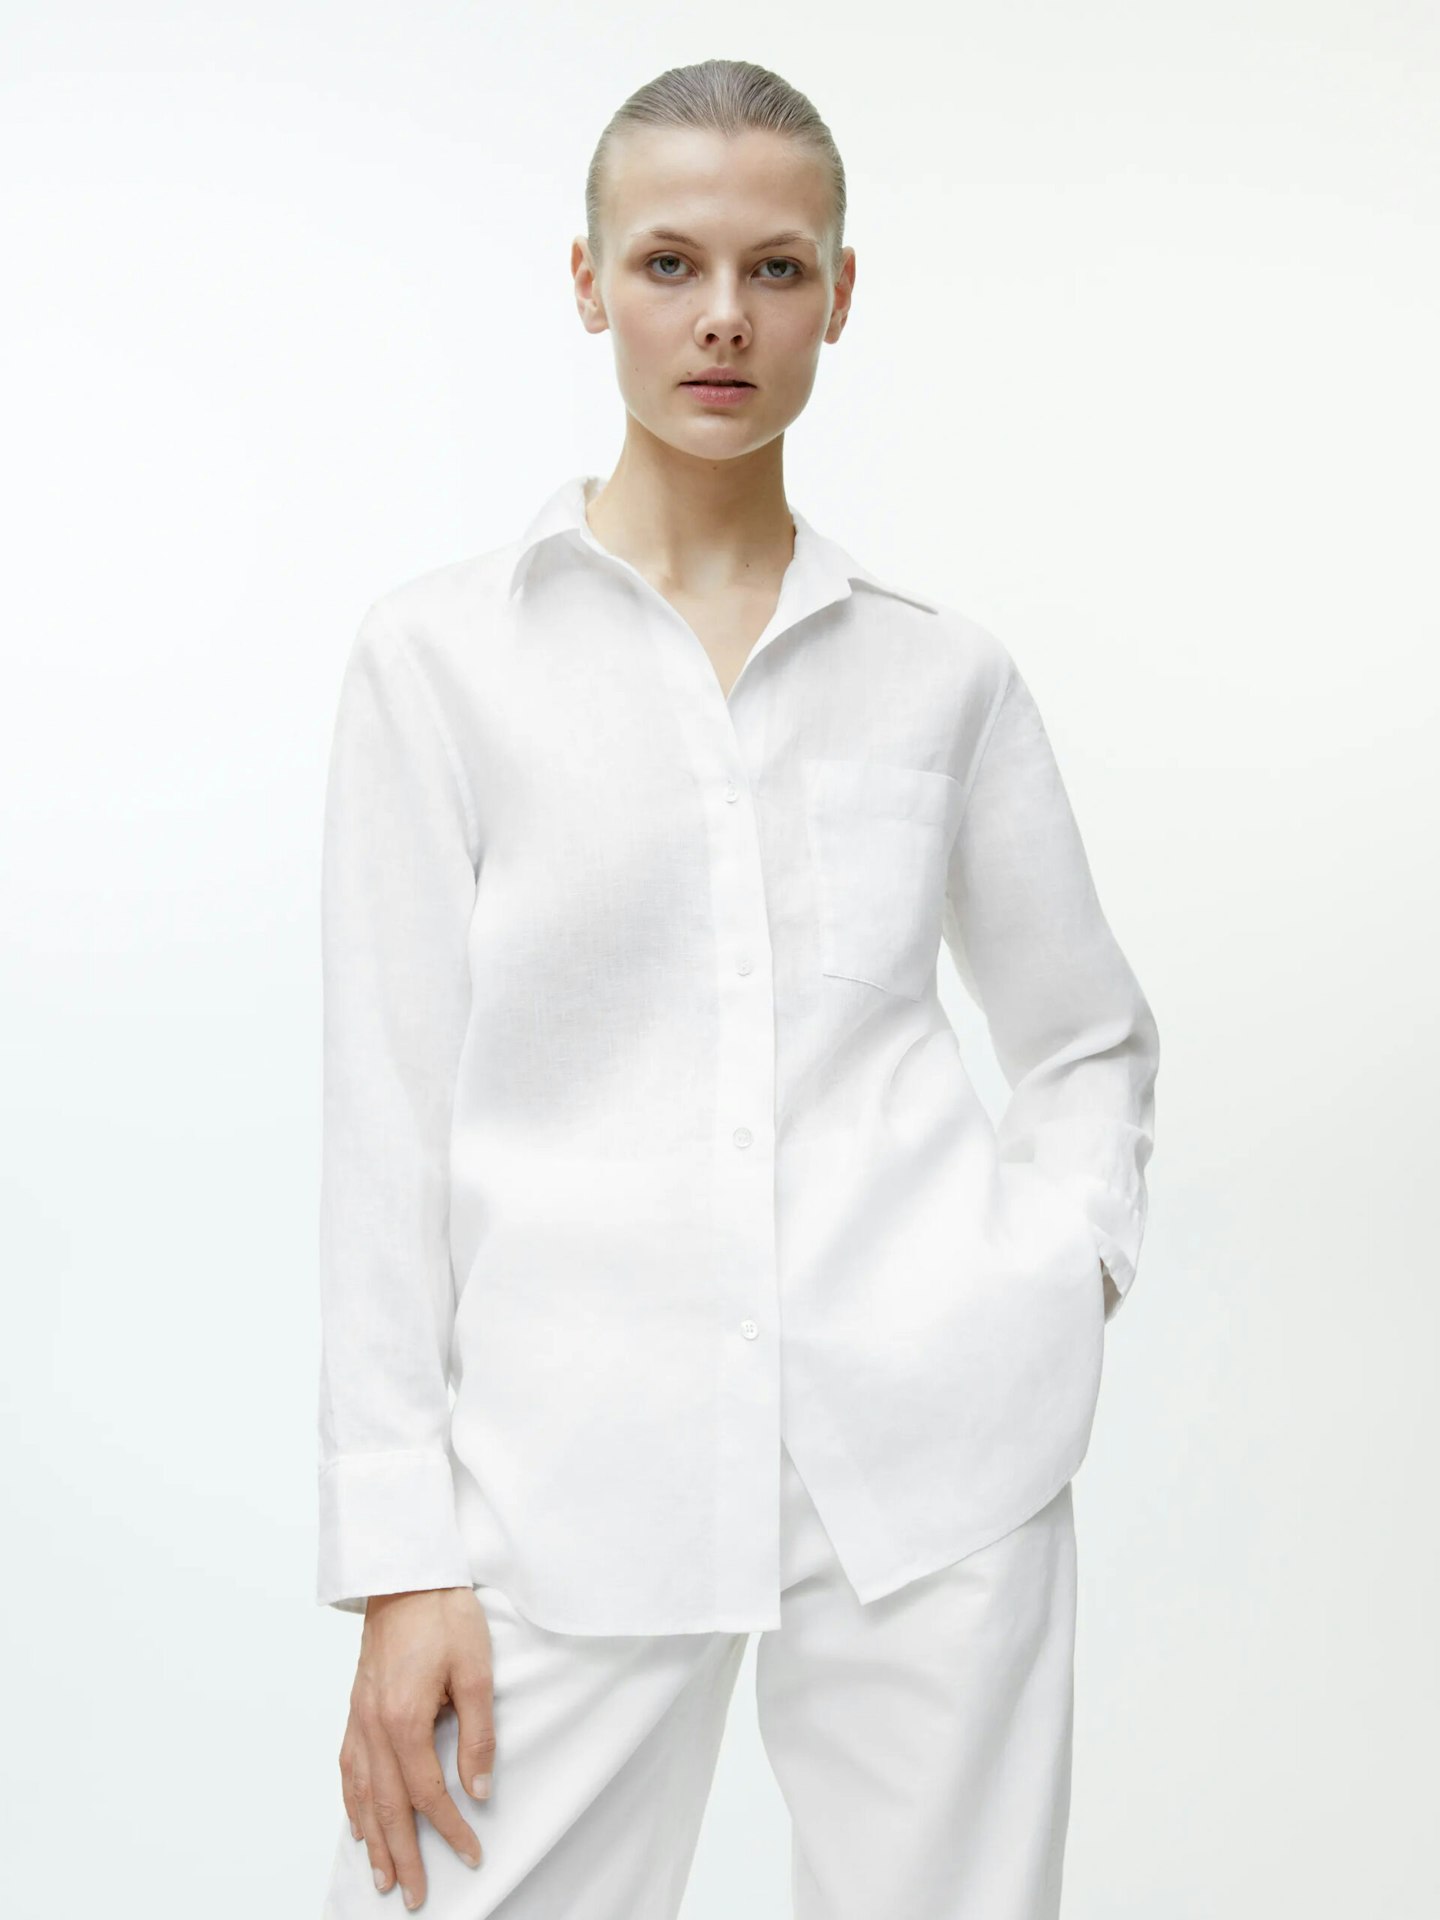 Best oversized shirts 2022: Our top picks for the high-street ...